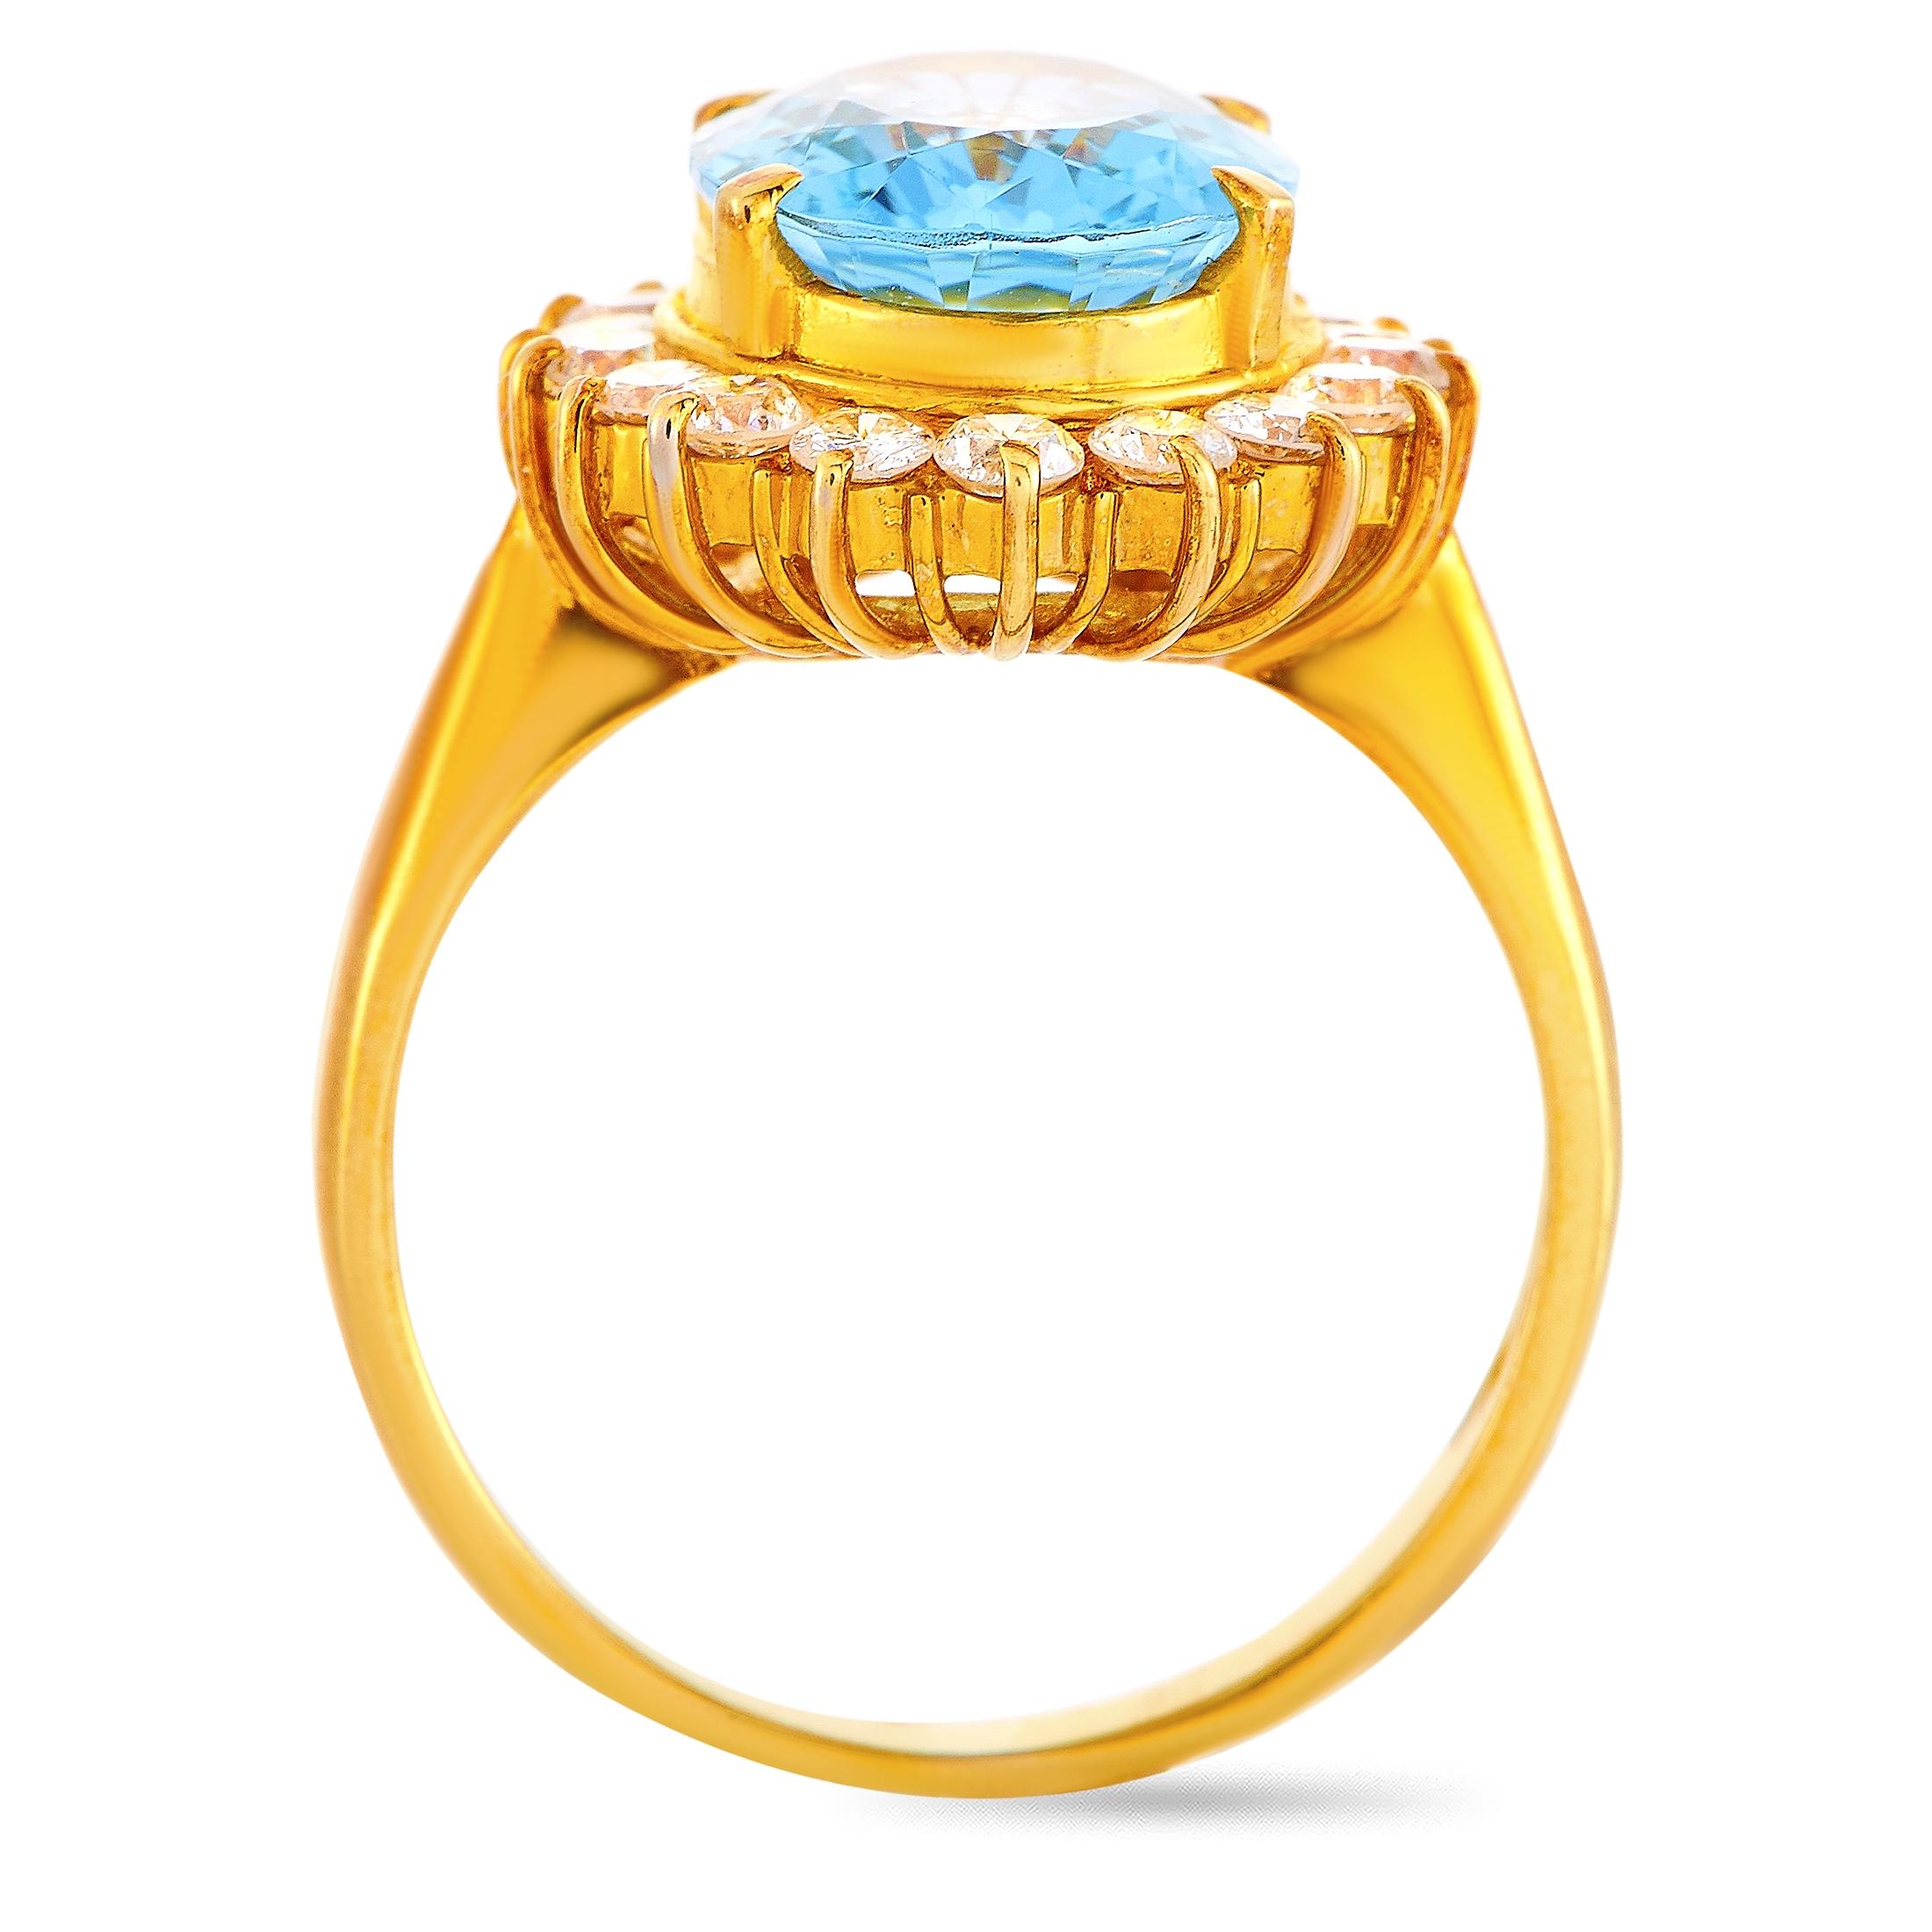 This LB Exclusive ring is crafted from 18K yellow gold and weighs 6.1 grams. It boasts band thickness of 3 mm and top height of 7 mm, while top dimensions measure 16 by 14 mm. The ring is set with a topaz that weighs 3.26 carats and with diamonds